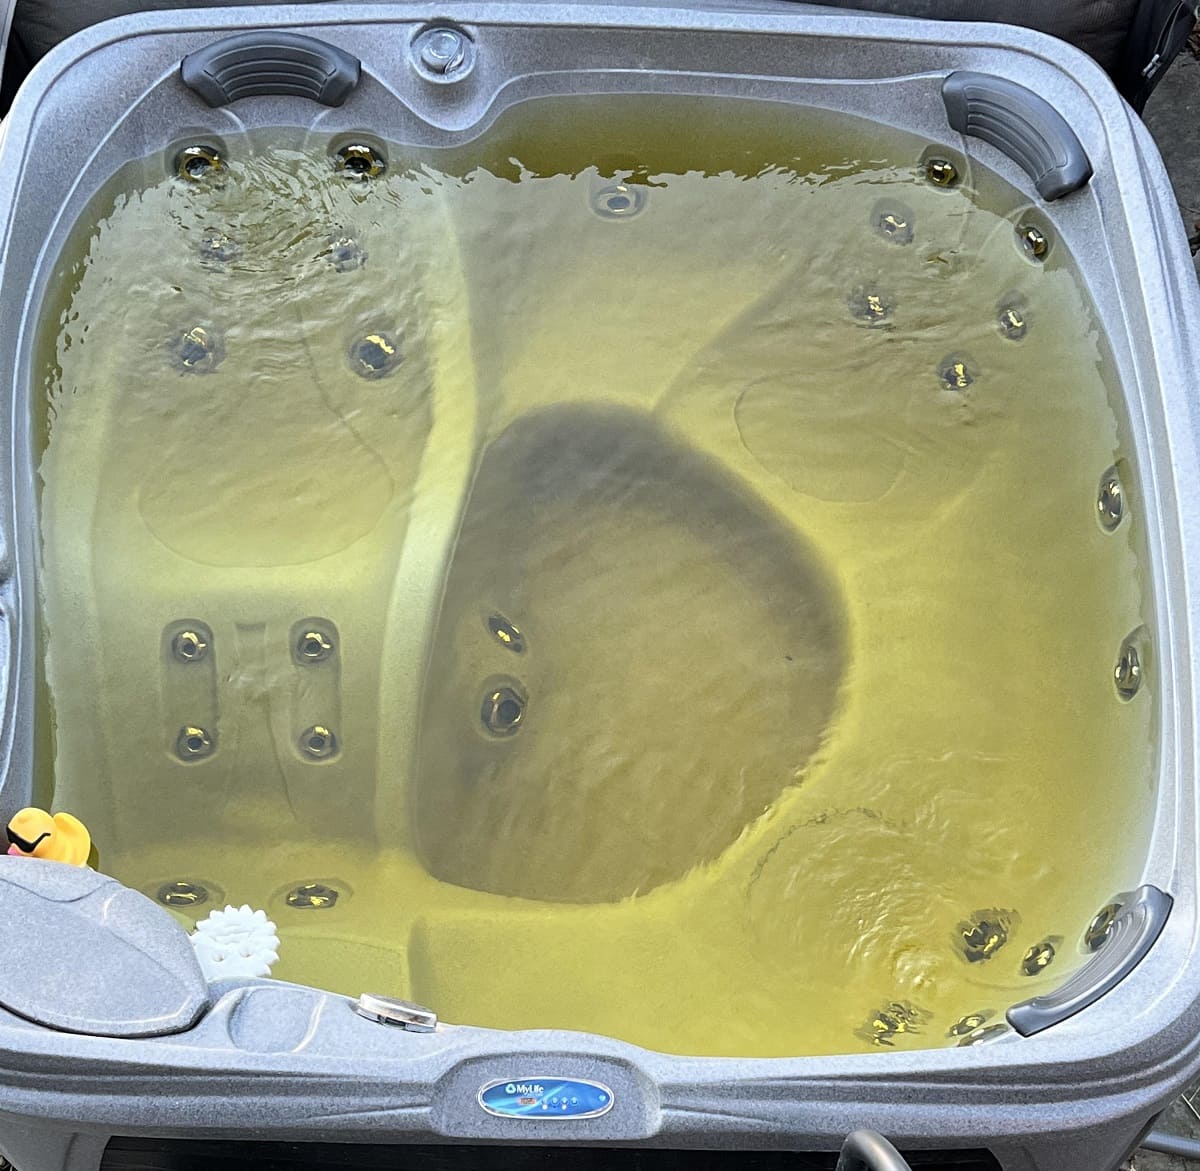 How To Fix Yellow Water In Hot Tub